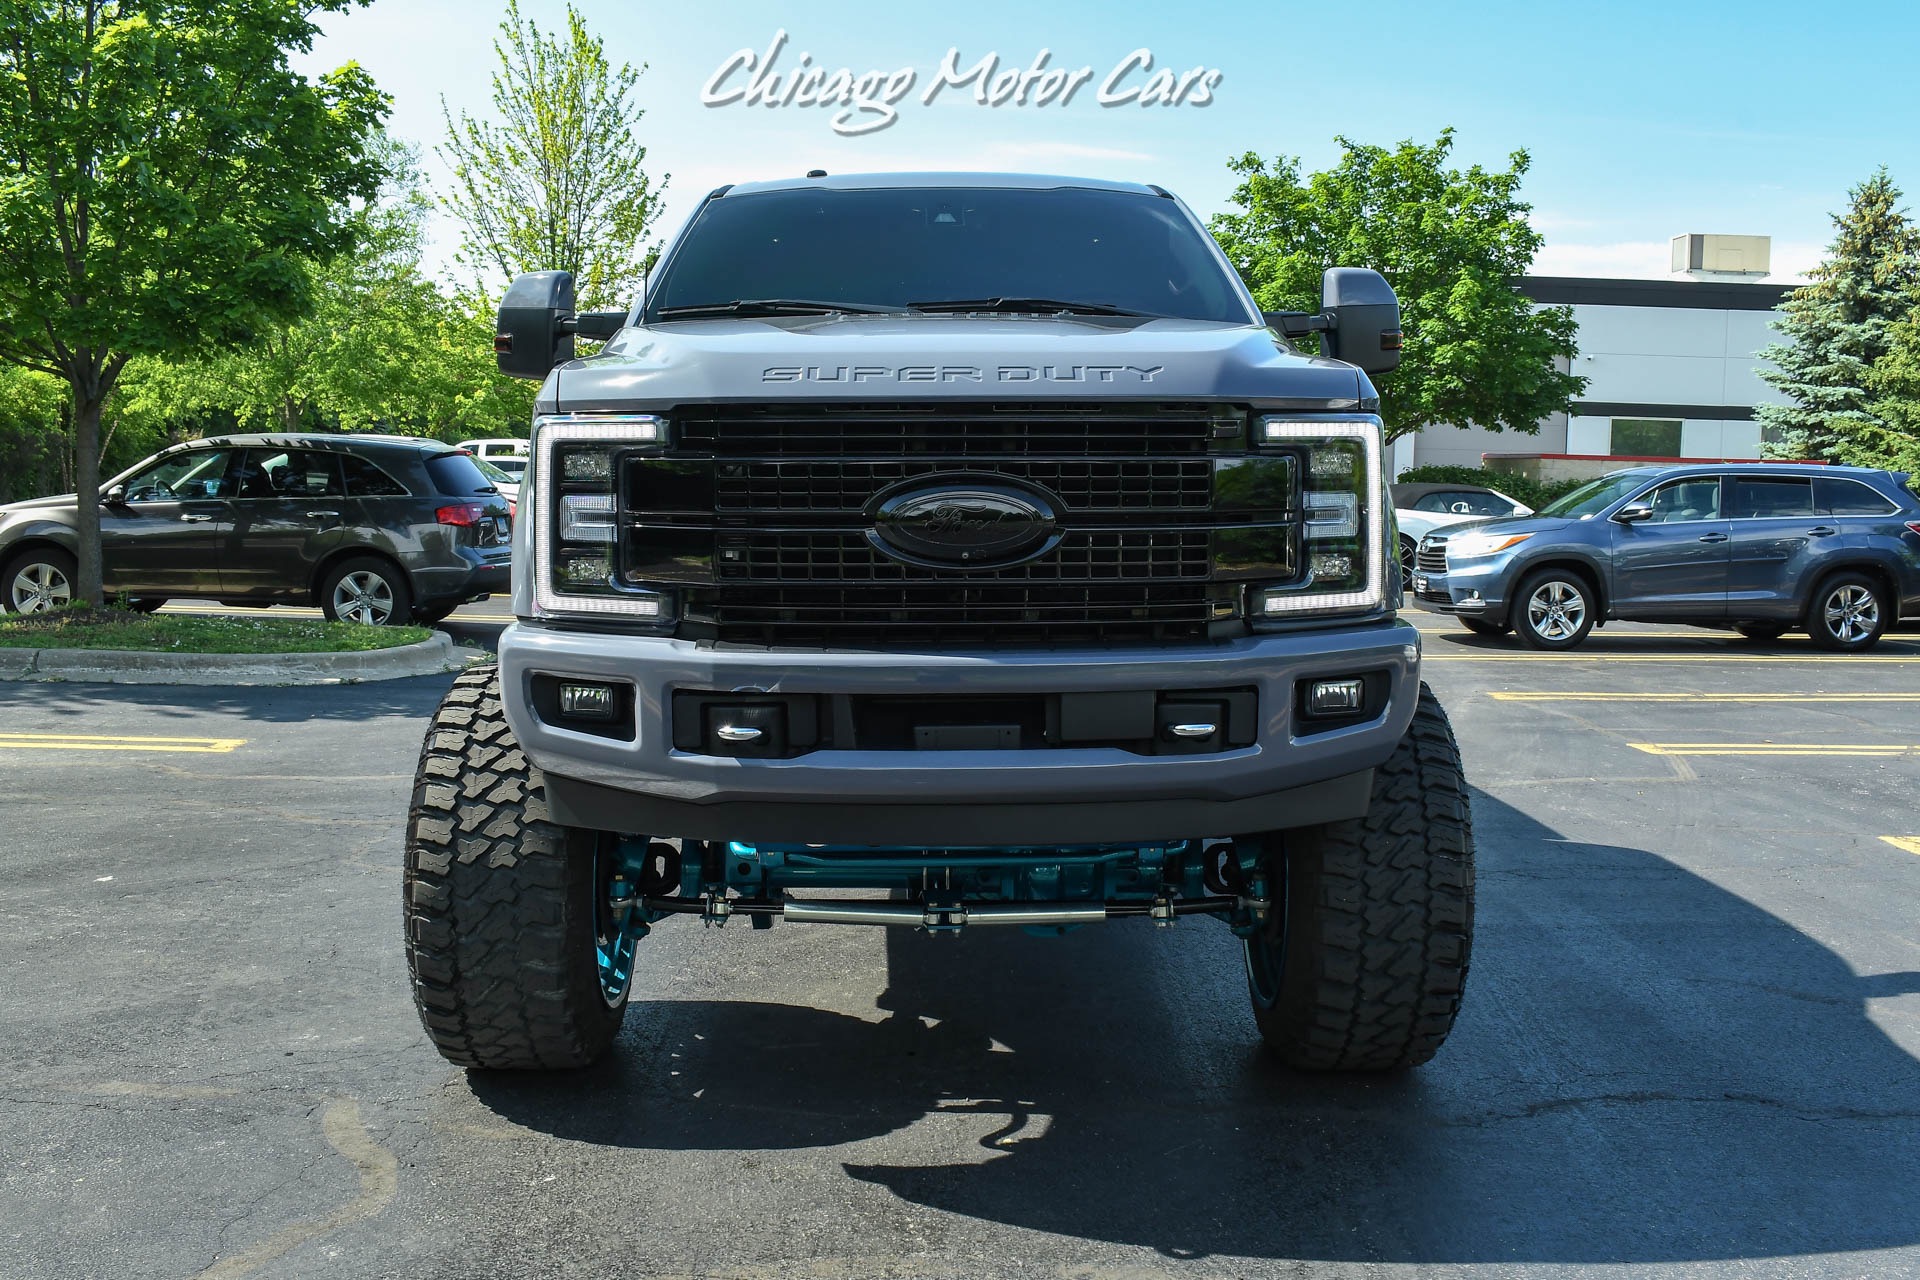 Used-2017-Ford-F-350-Super-Duty-Platinum-ADA-Build-Over-150k-in-UPGRADES